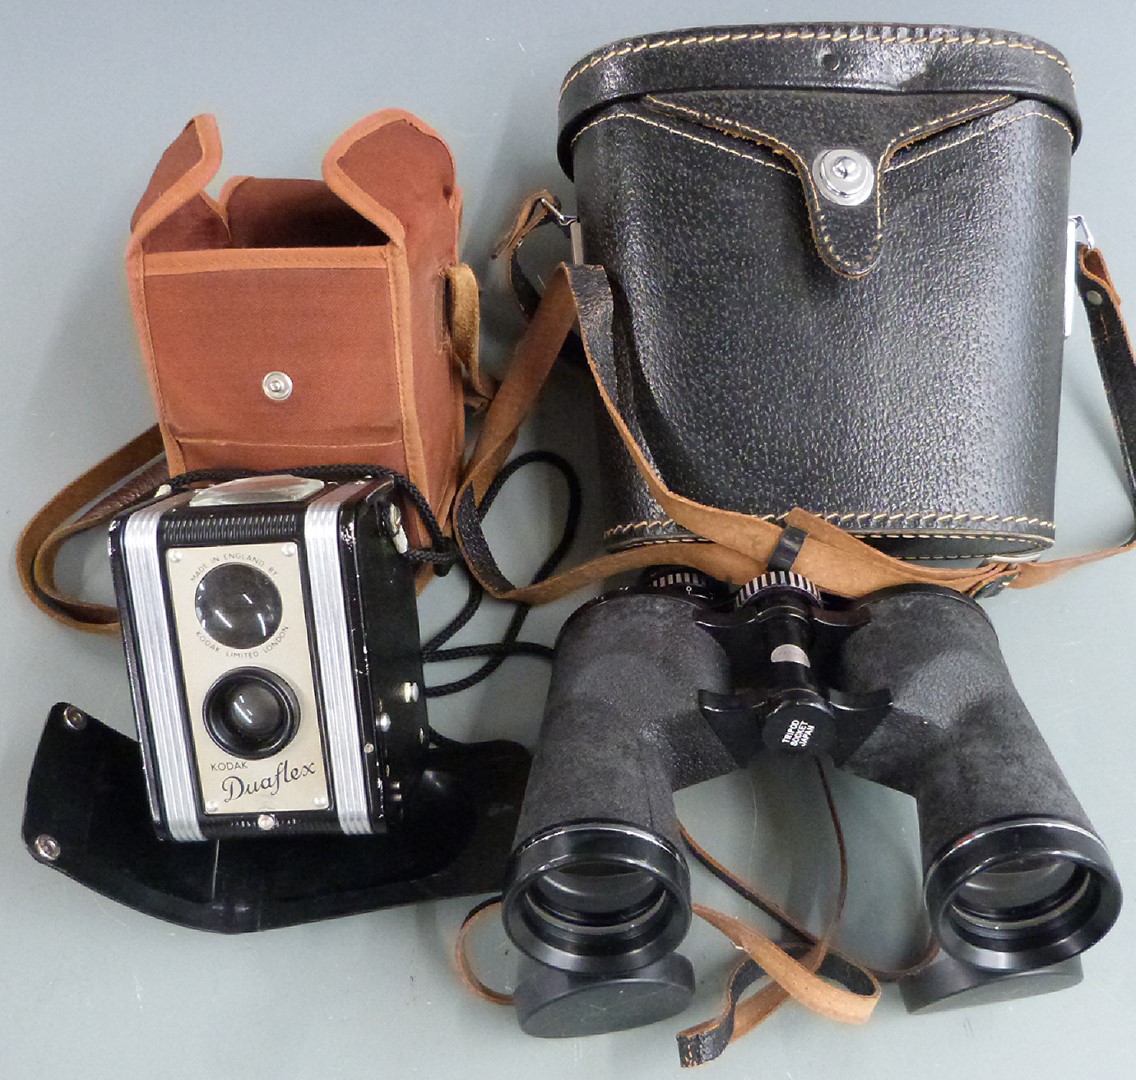 Kodak Duaflex camera in canvas pouch and a pair of binoculars - Image 2 of 6